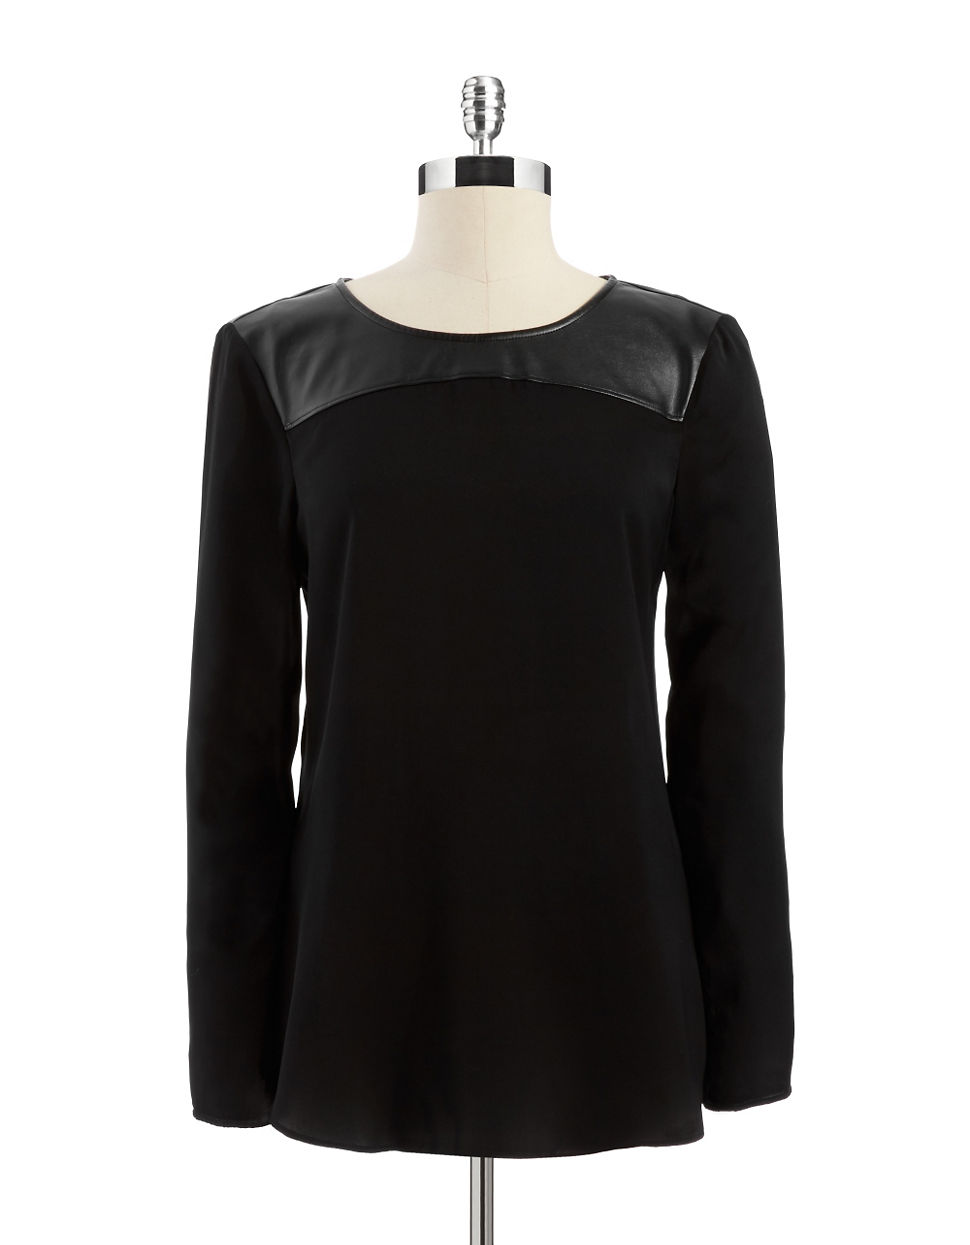 Dkny Blouse with Faux Leather Yolk in Black | Lyst